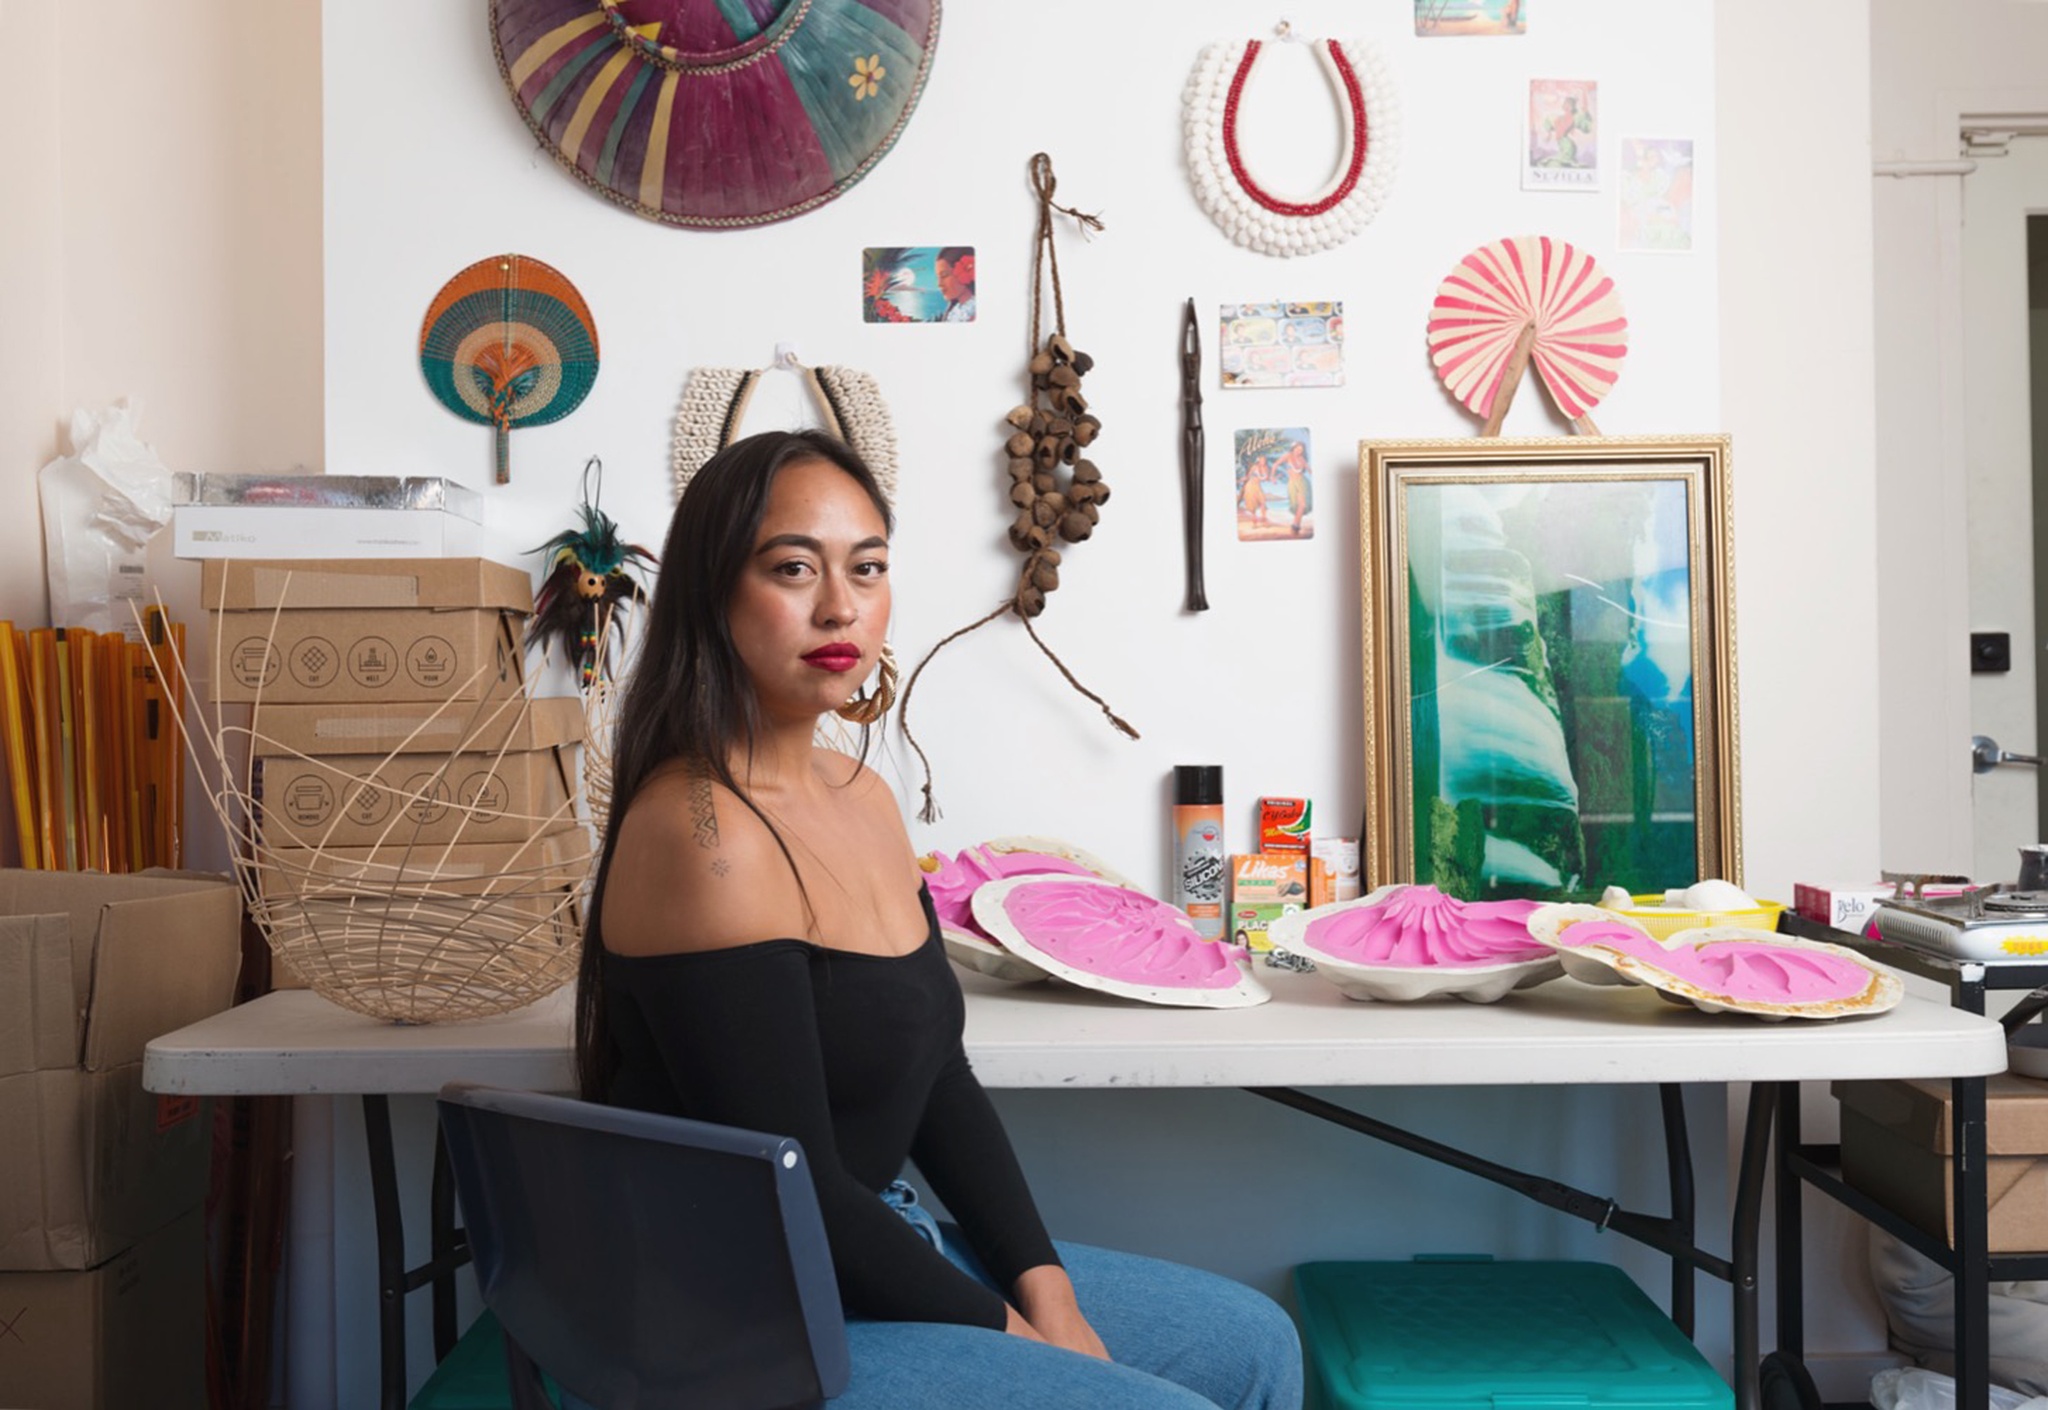 A photo of the artist Caroline Garcia sits in front of a table in her studio. On the wall behind her hang colorful fans, postcards, and other objects.